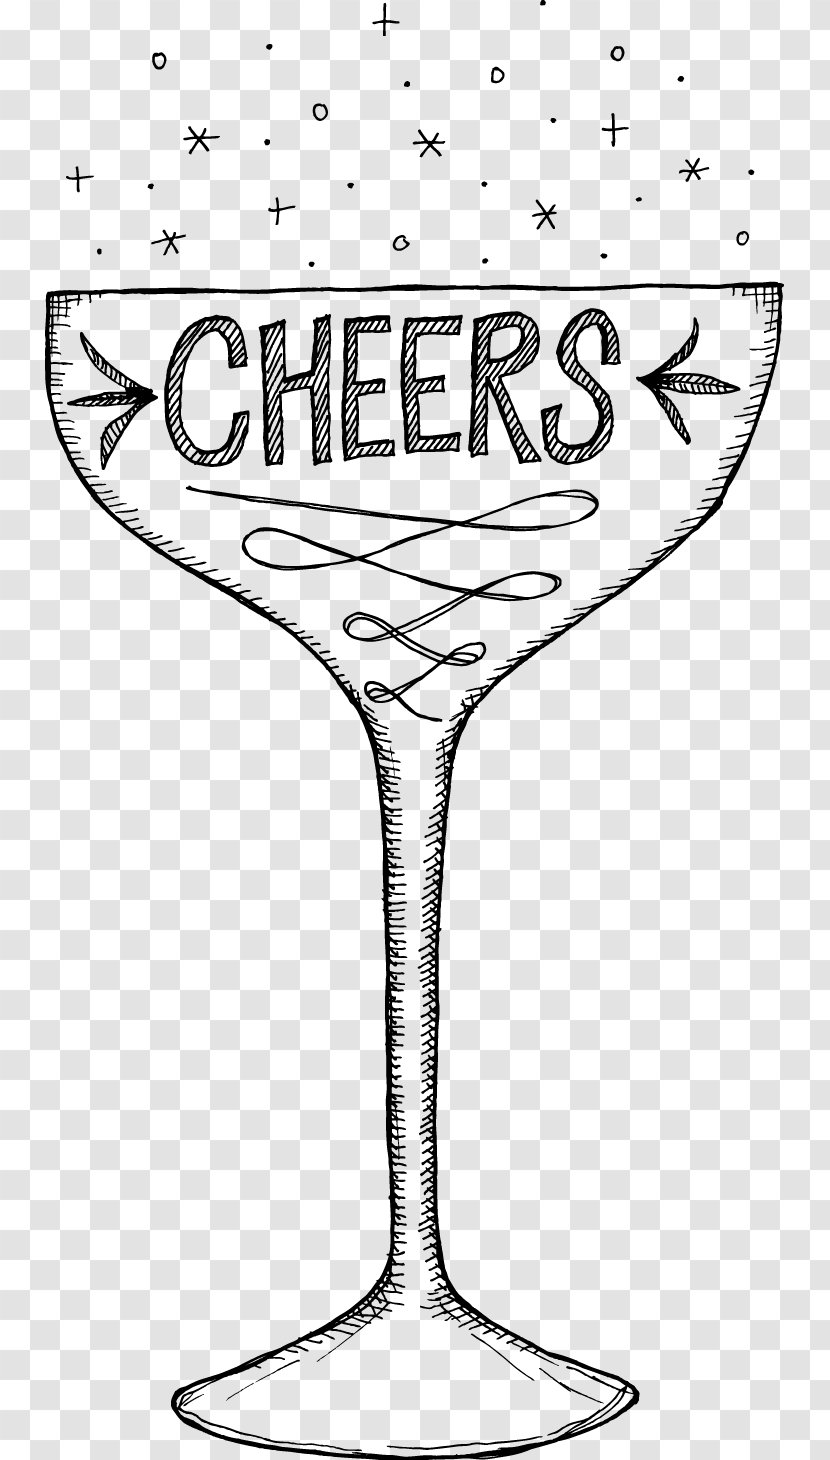 Champagne Glass Wine Drawing Illustration - Doodle - Iftar Party Doodles Transparent PNG